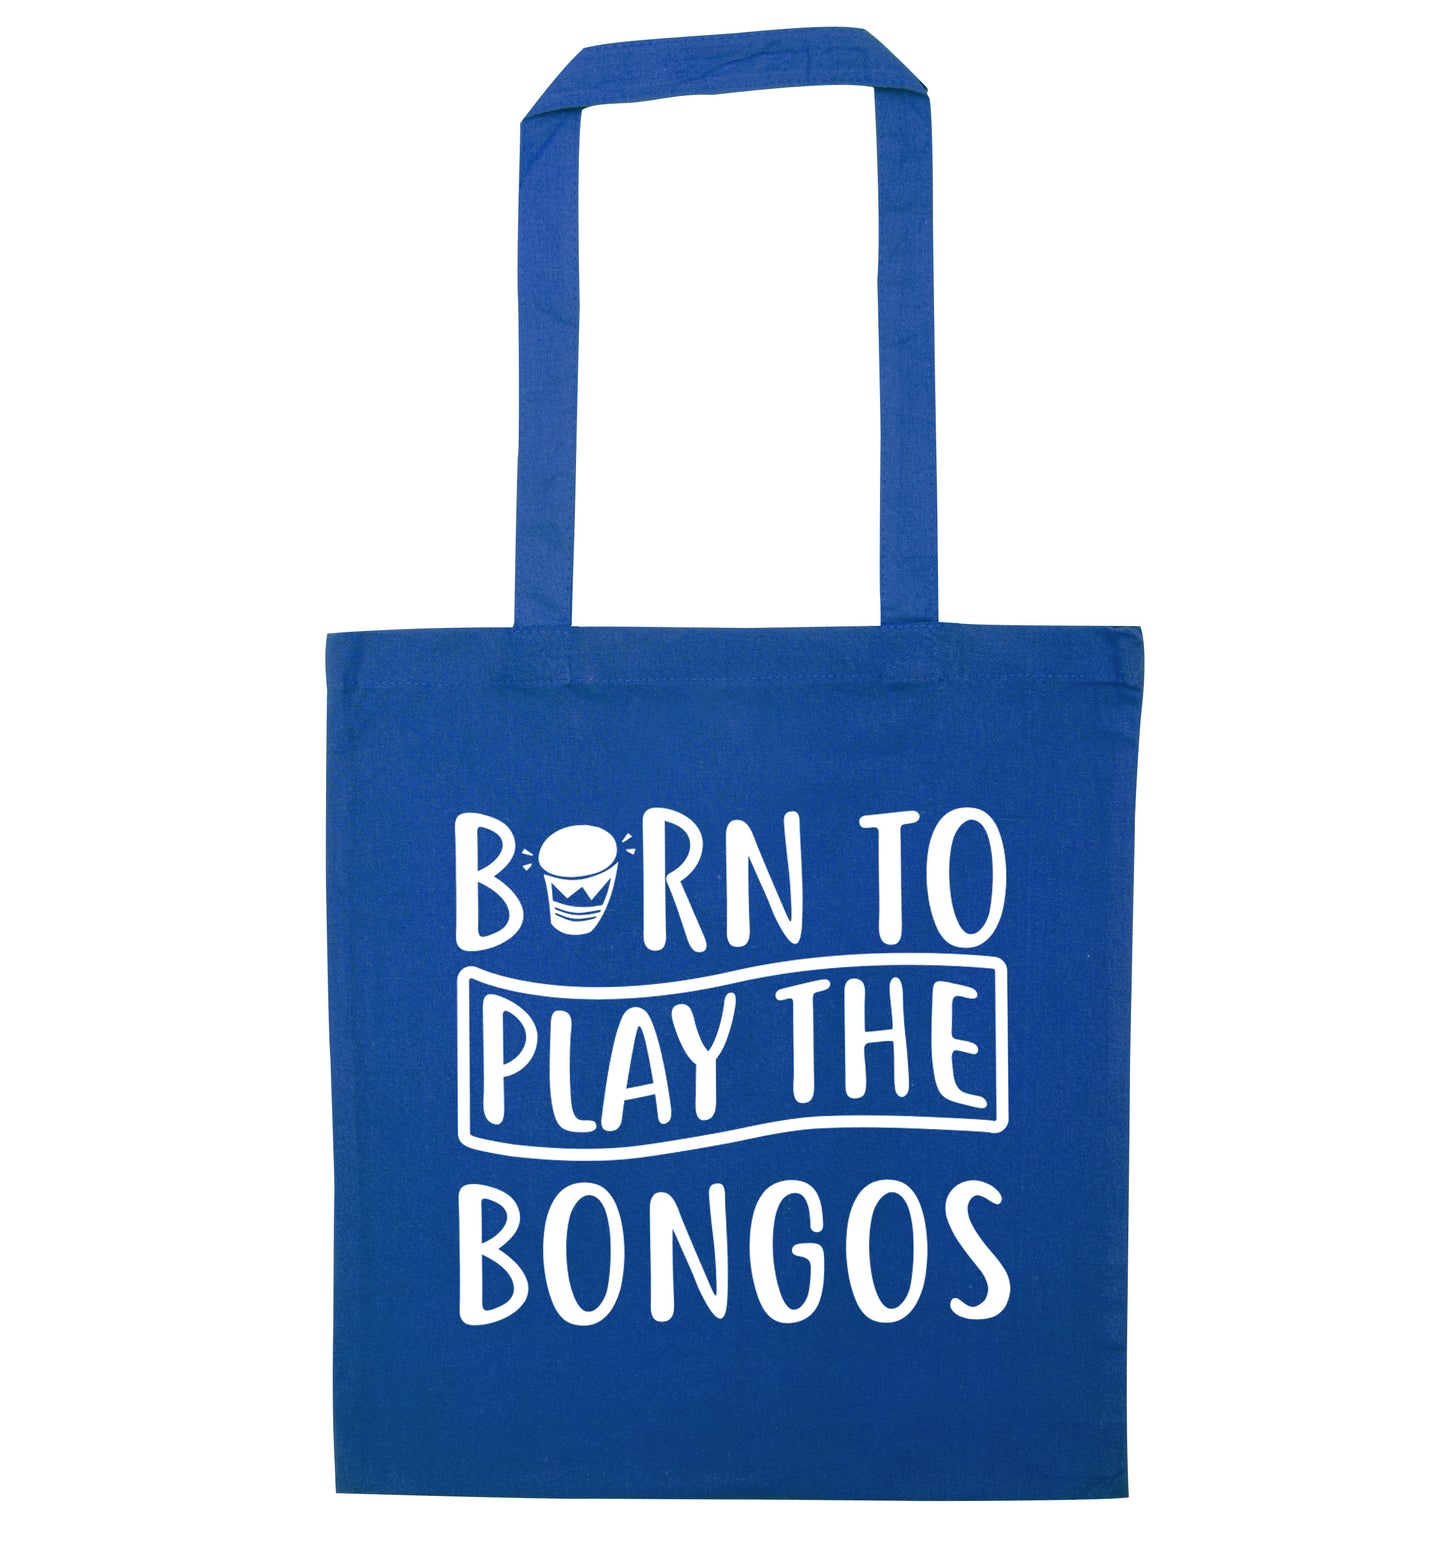 Born to play the bongos blue tote bag